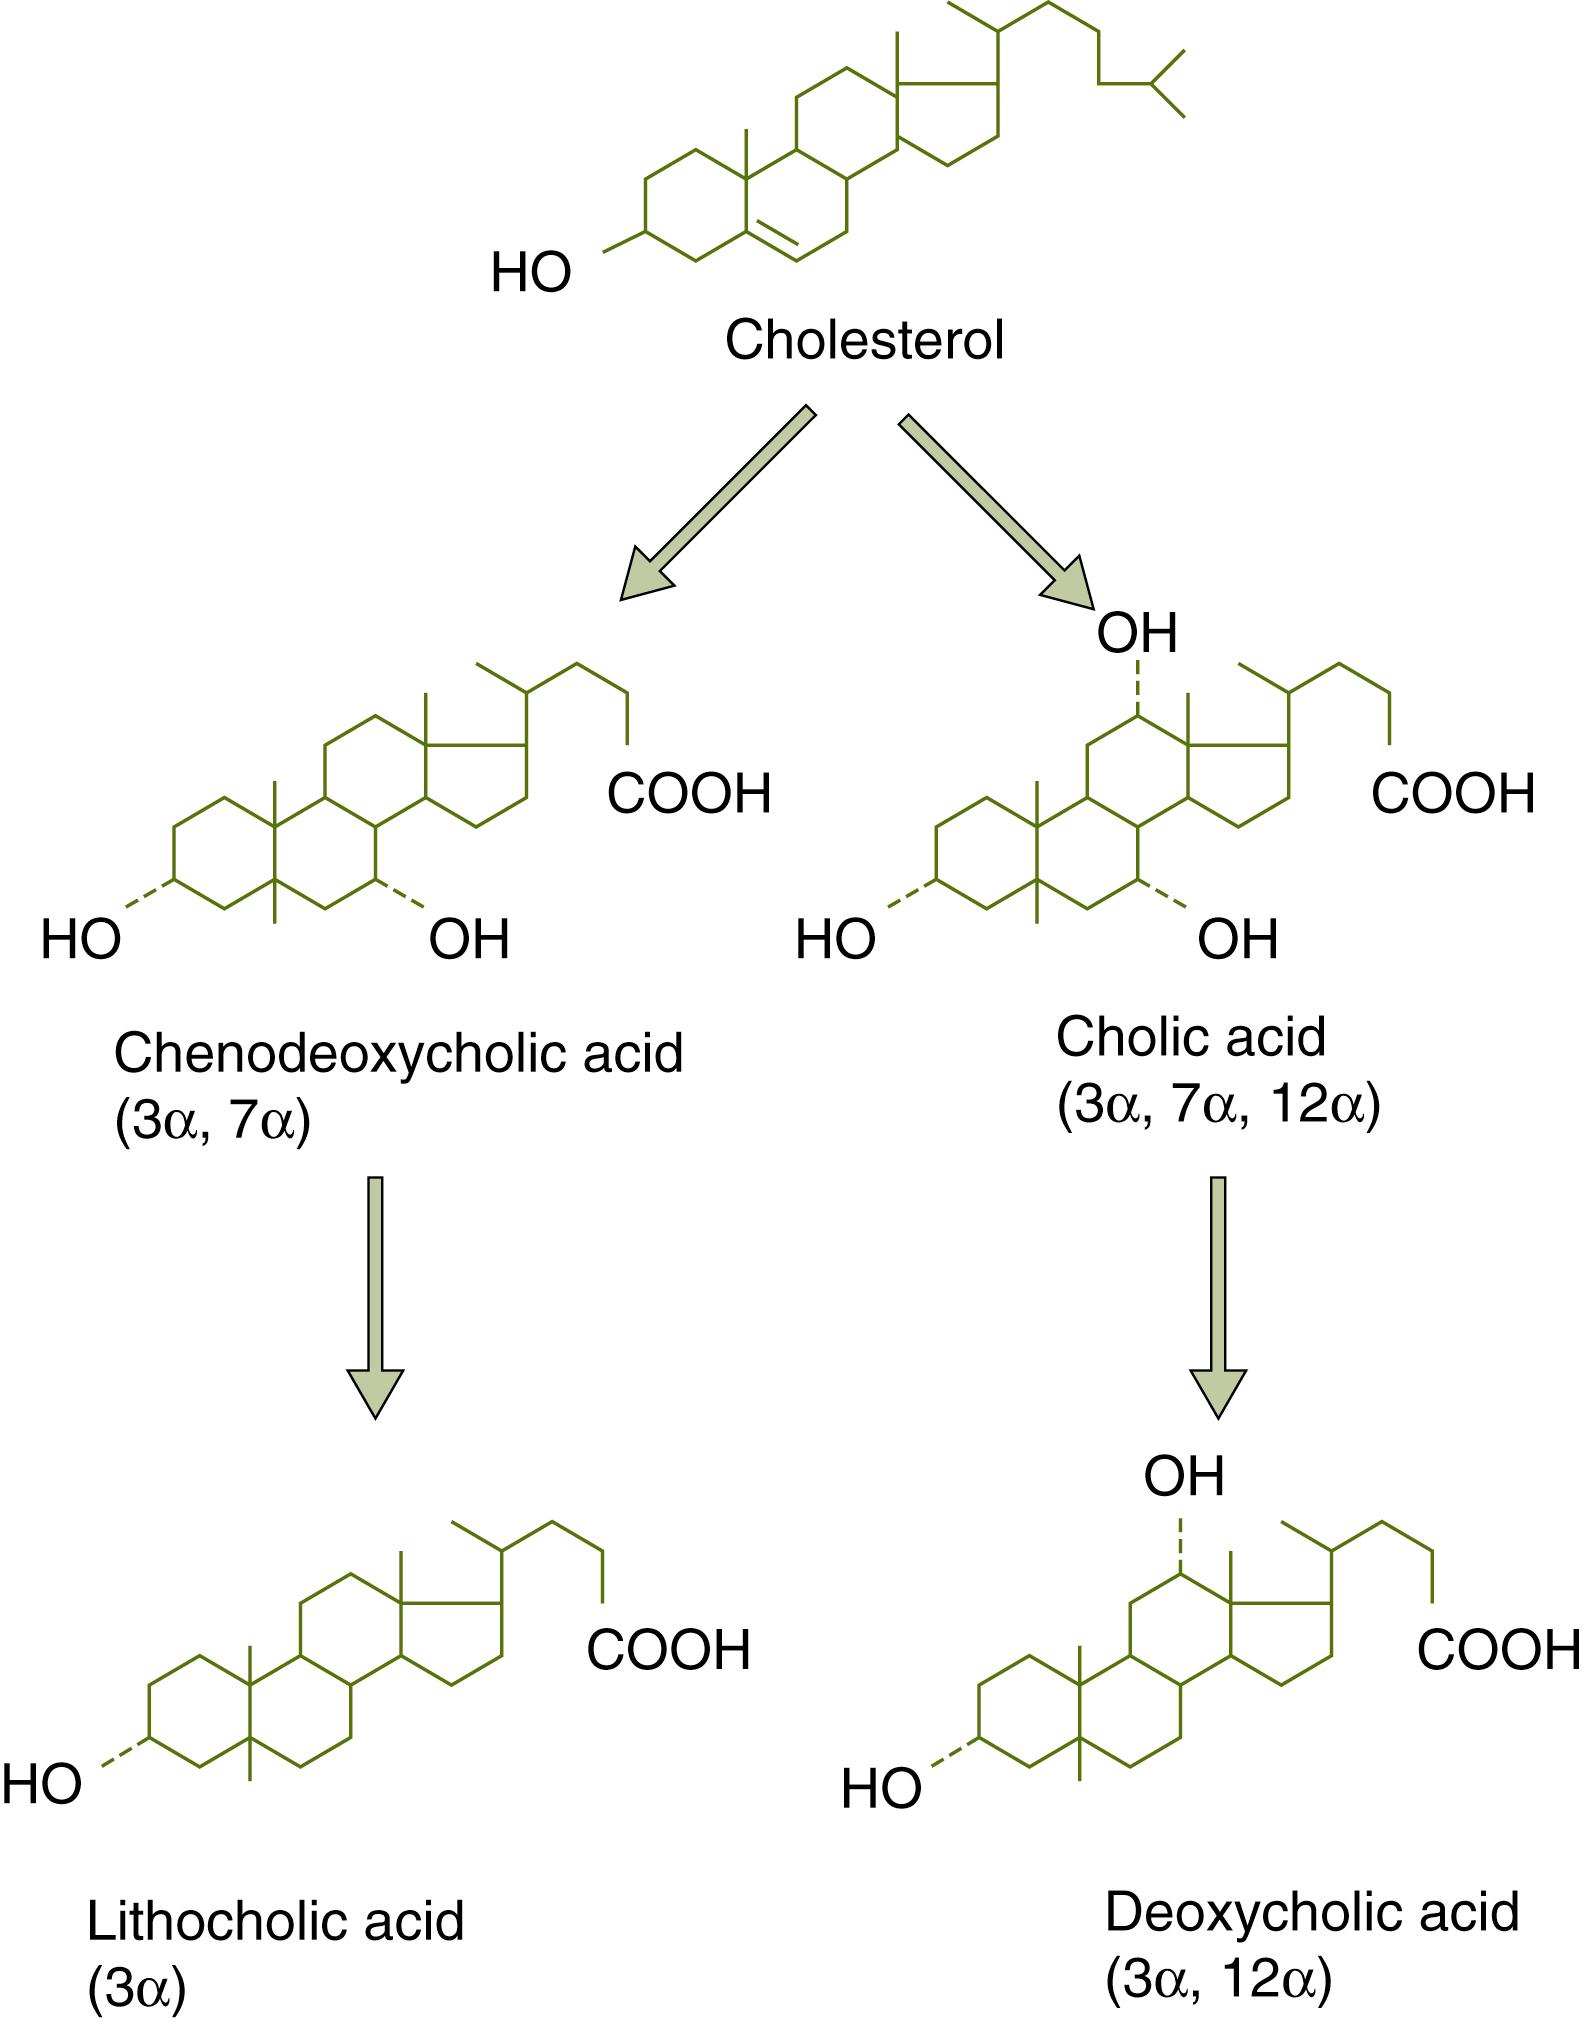 Fig. 3.1, Primary bile acids synthesized in liver from cholesterol, and the secondary bile acids produced by bacterial 7α-dehydroxylation.